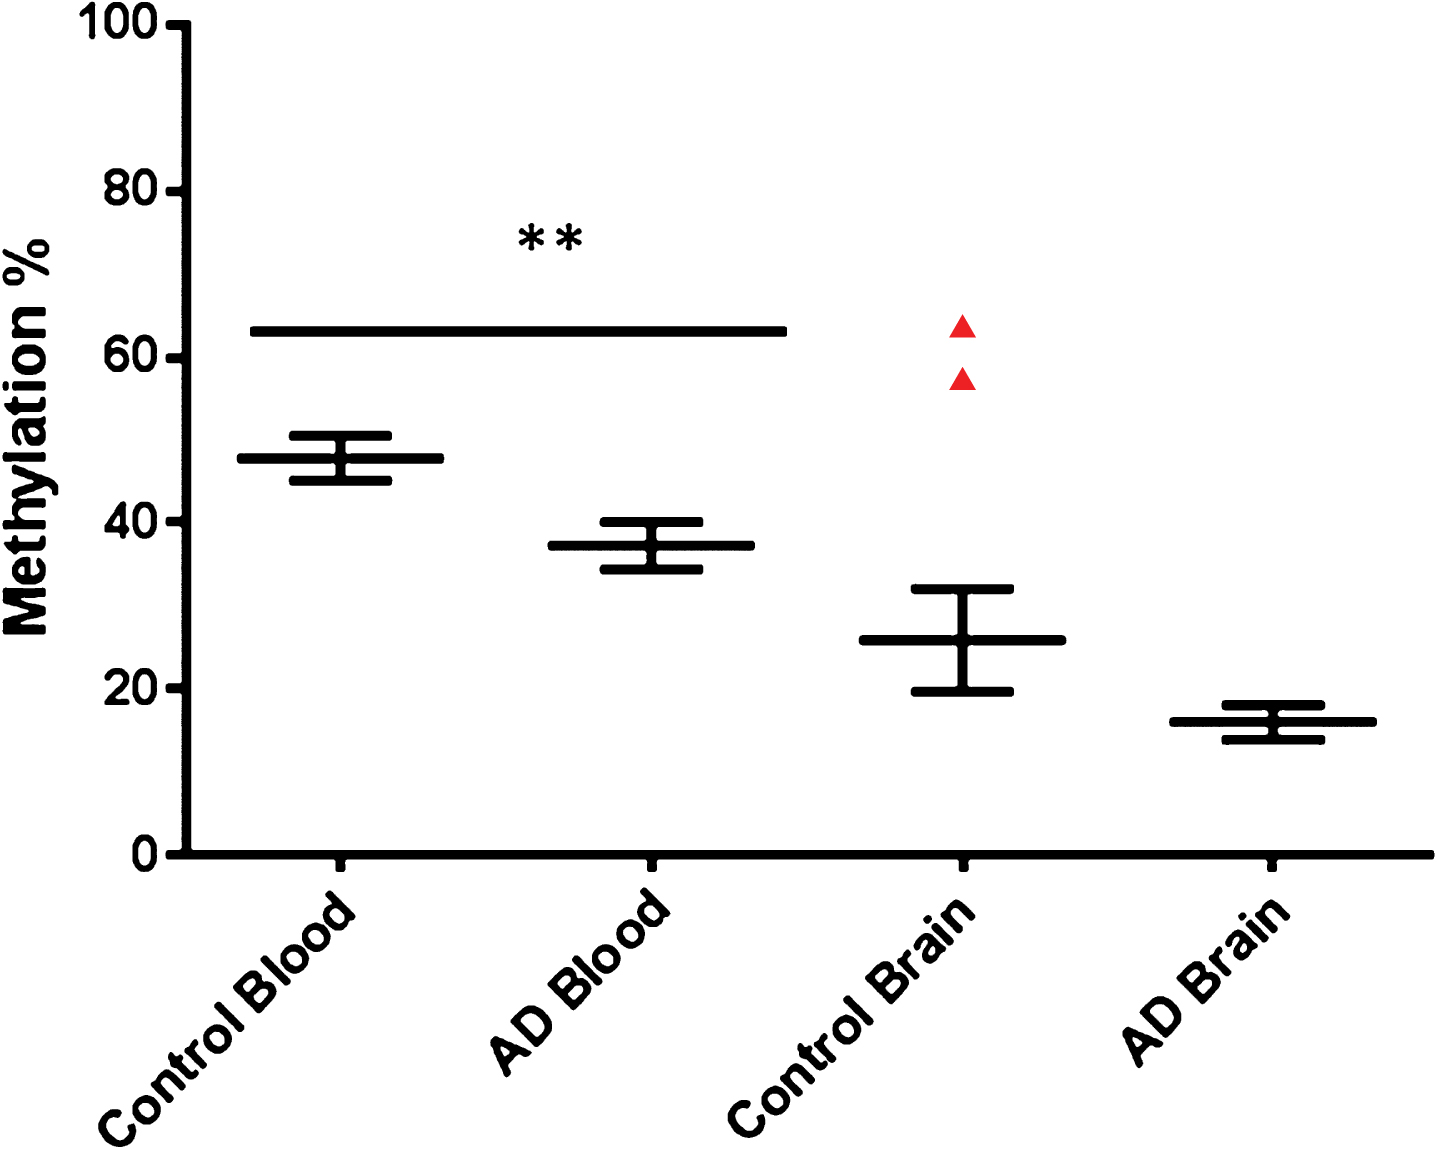 Collective group wide methylation Control versus AD for RIN3. Graph shows average methylation across the whole region investigated in the RIN3 3’UTR. Control blood n = 26, AD blood n = 22, Control brain n = 10, AD brain n = 14. Control blood Male to Female n = 12/14, AD blood Male to Female n = 15/7.